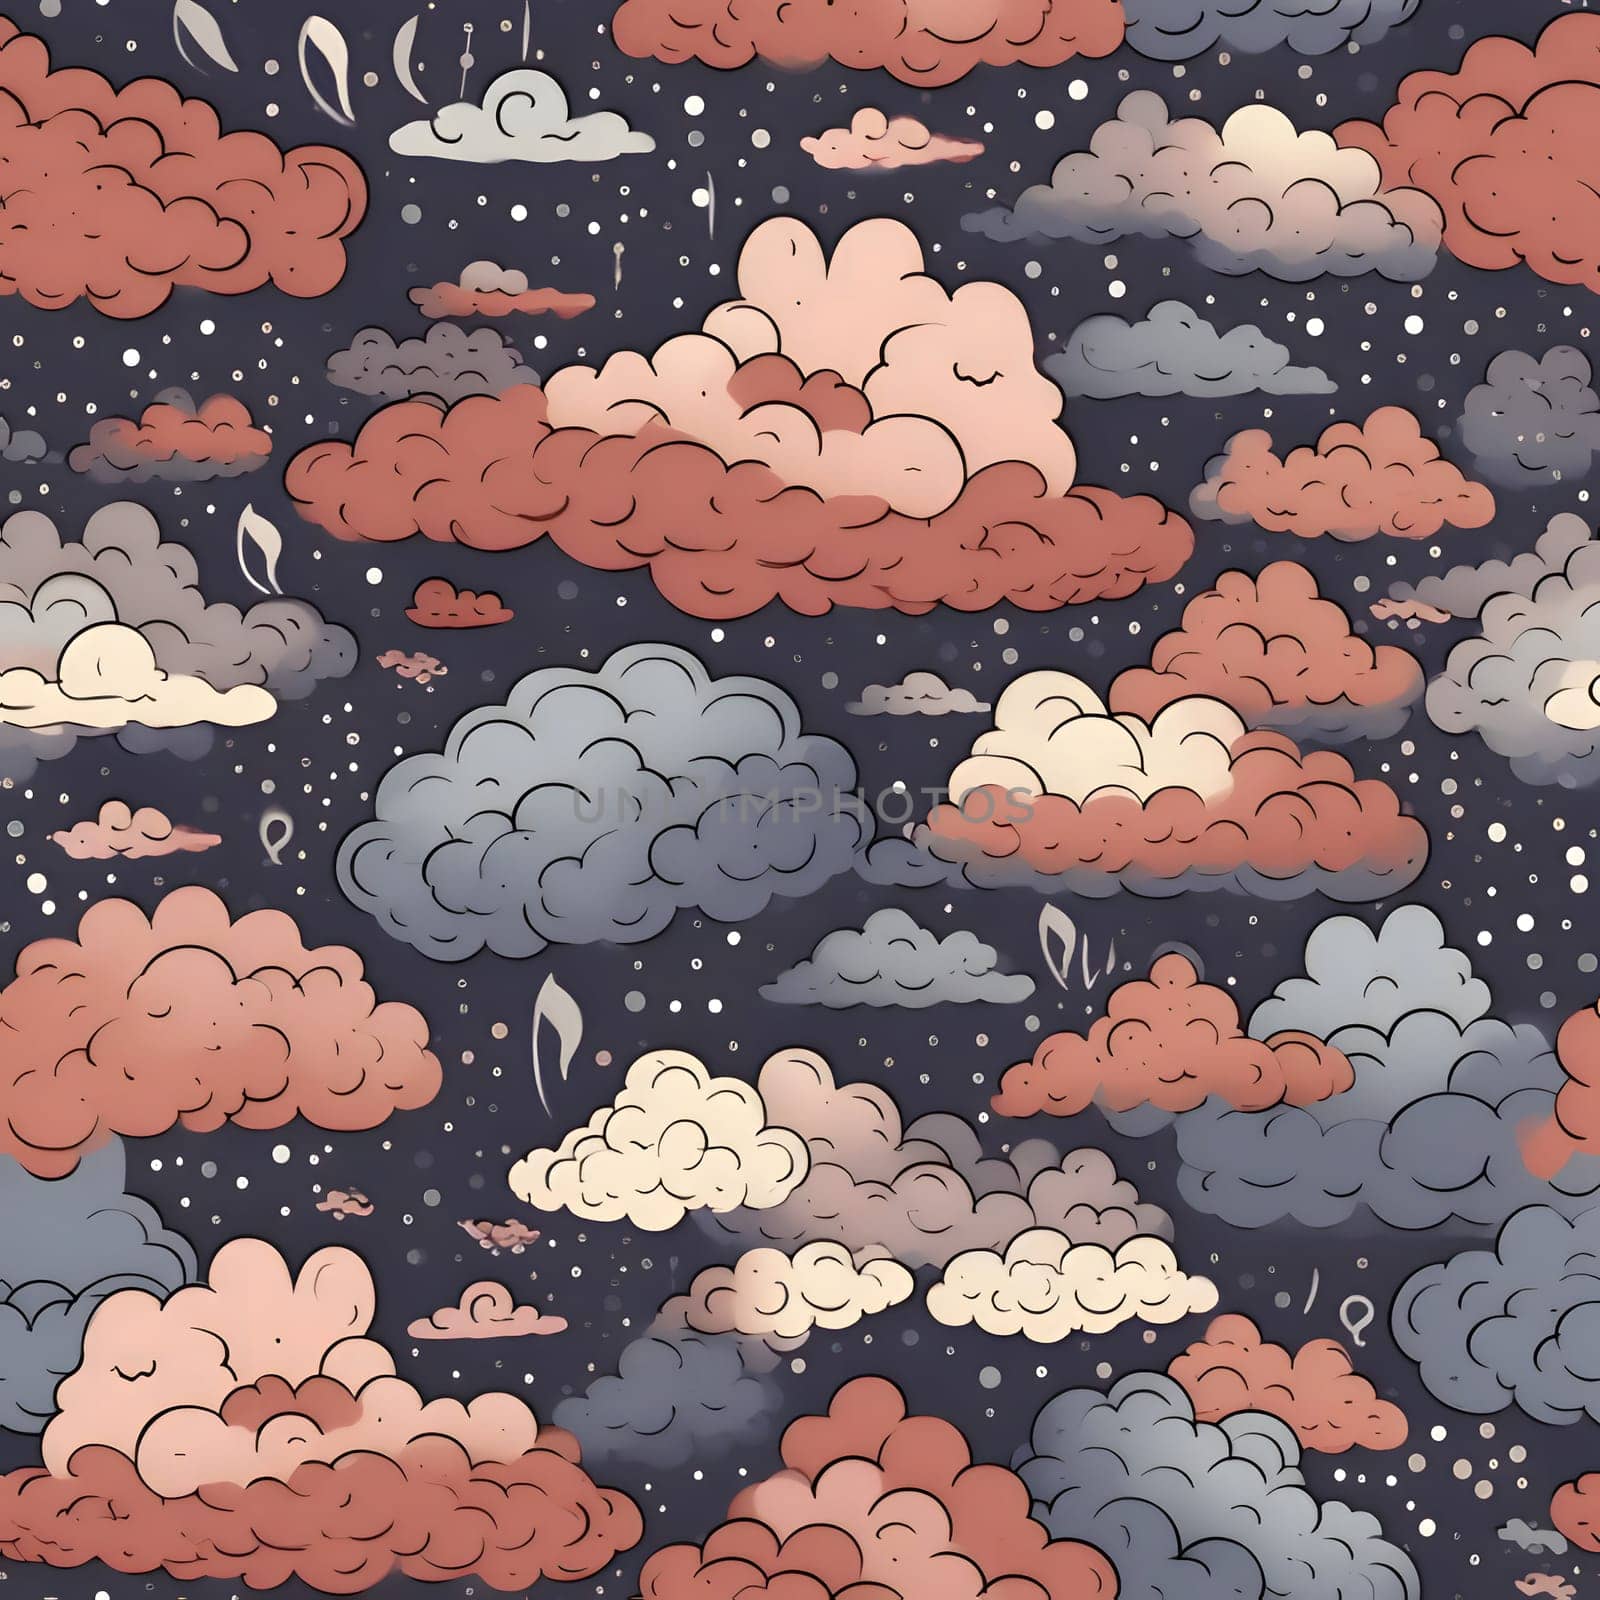 Patterns and banners backgrounds: Seamless pattern with clouds and rain. Vector illustration in cartoon style.